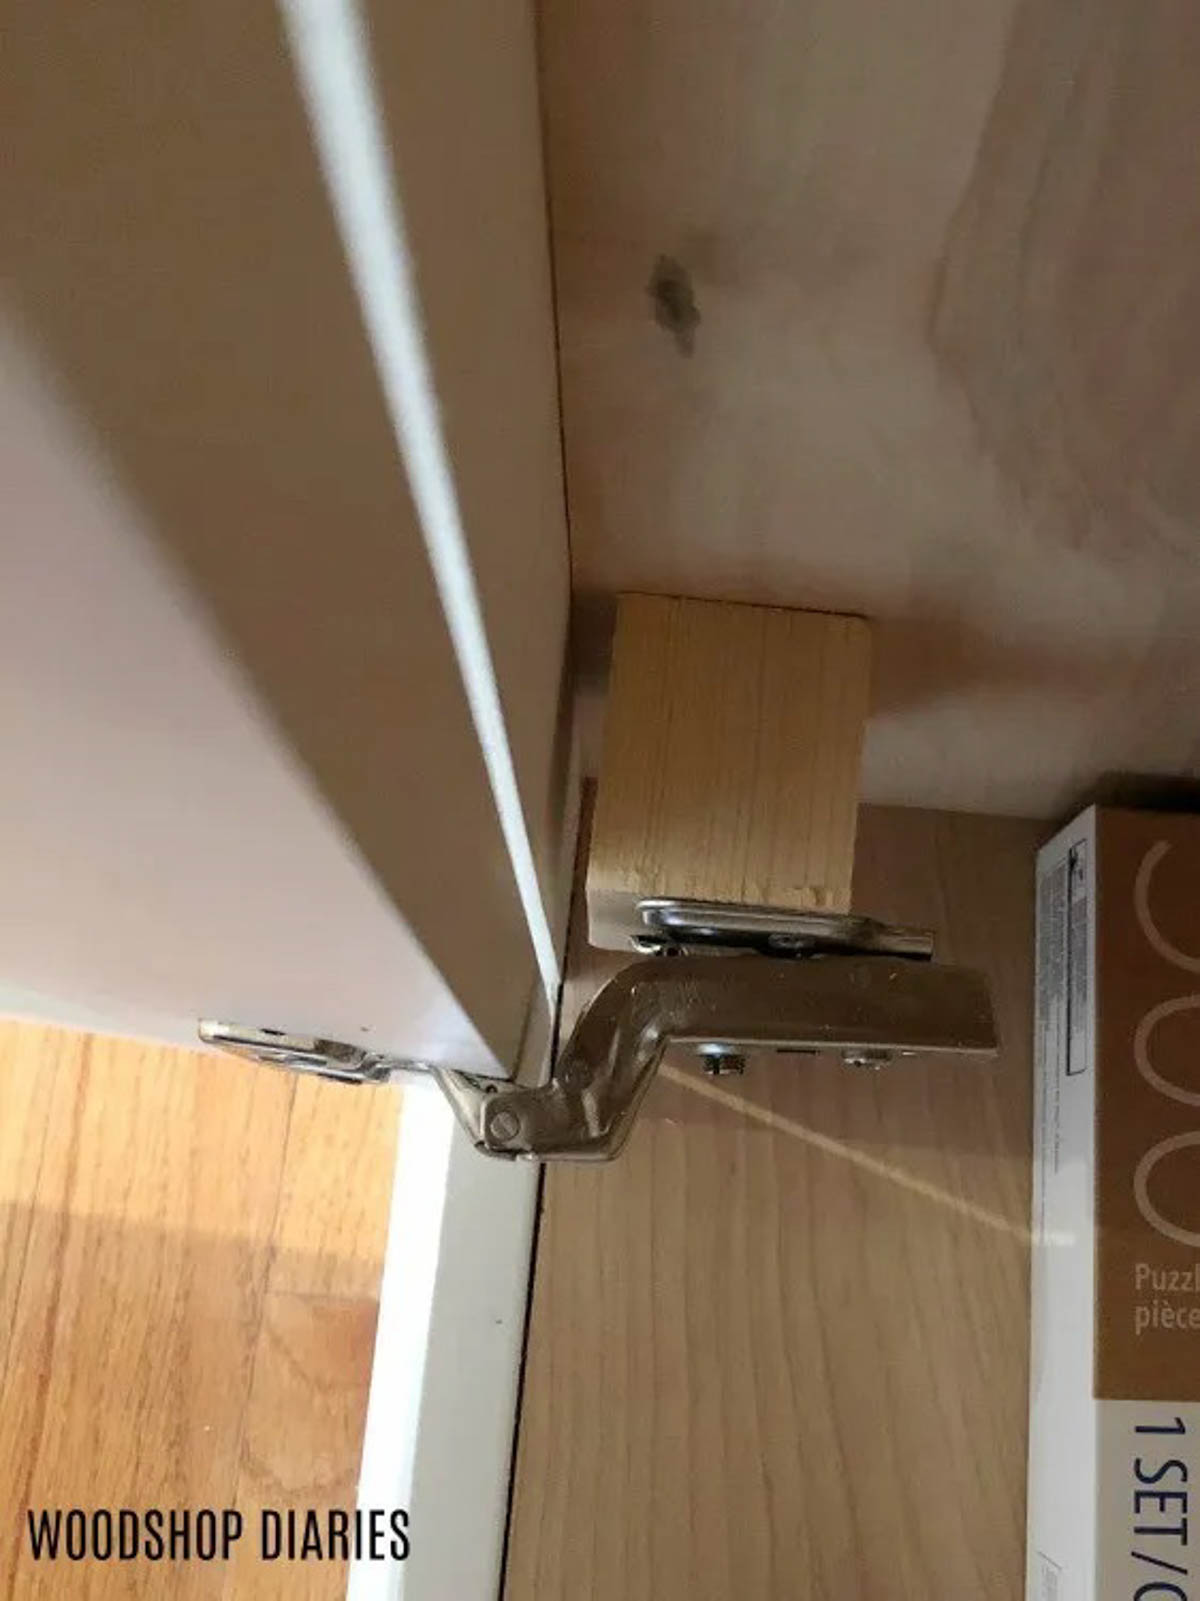 close up image of spacer block being used to install door hinges